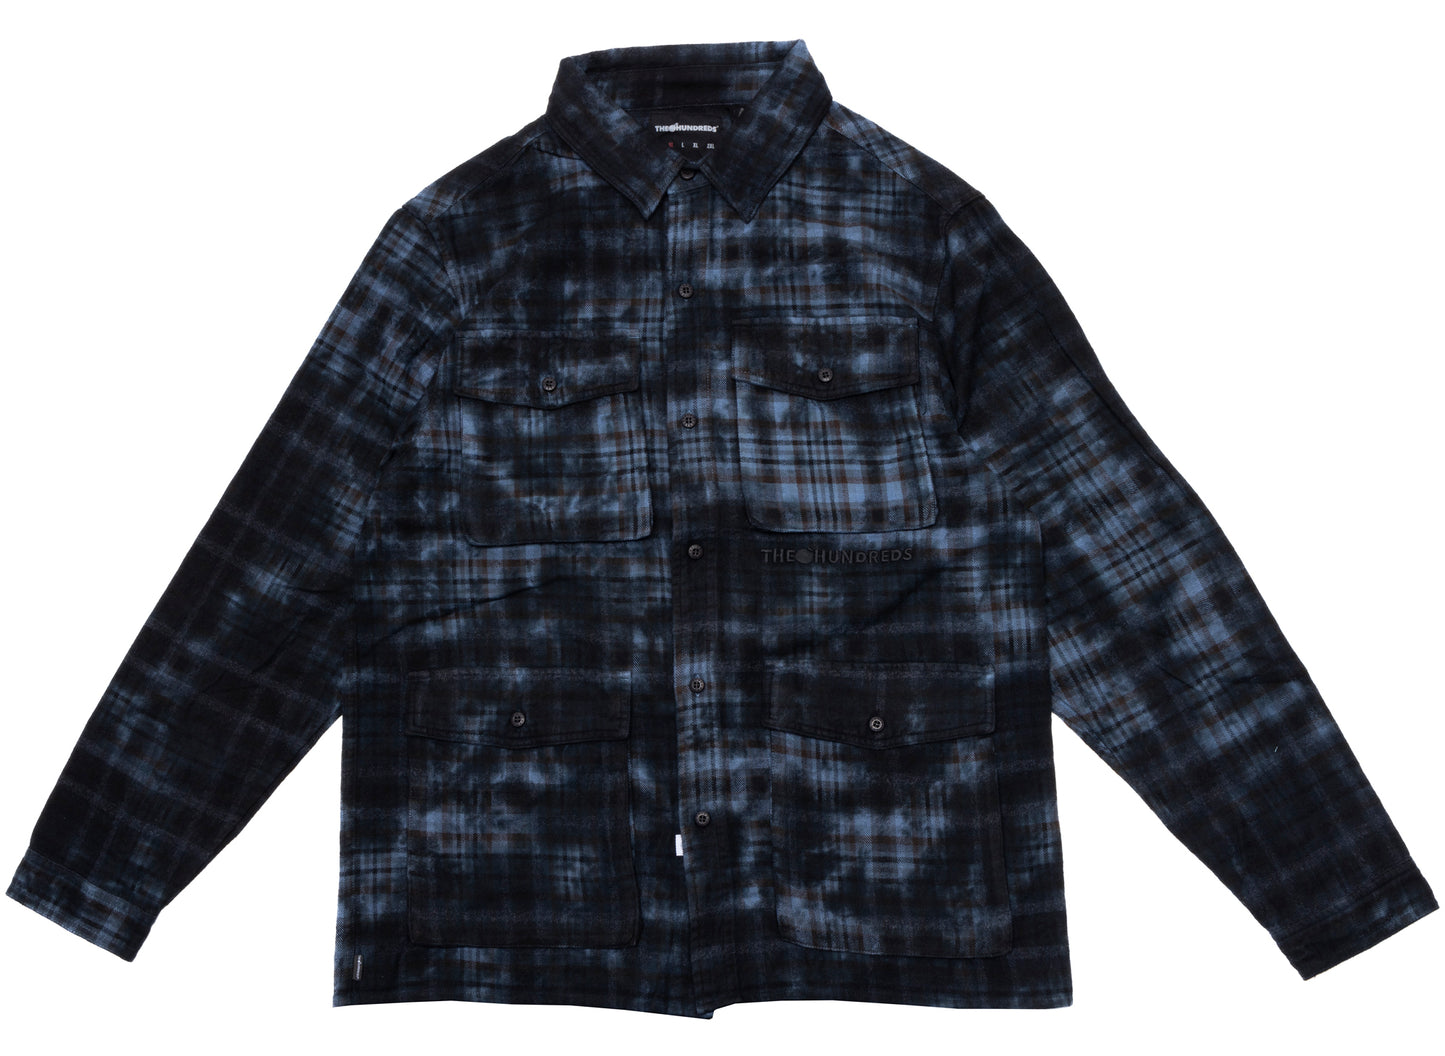 The Hundreds Bagger Button-Up in Black